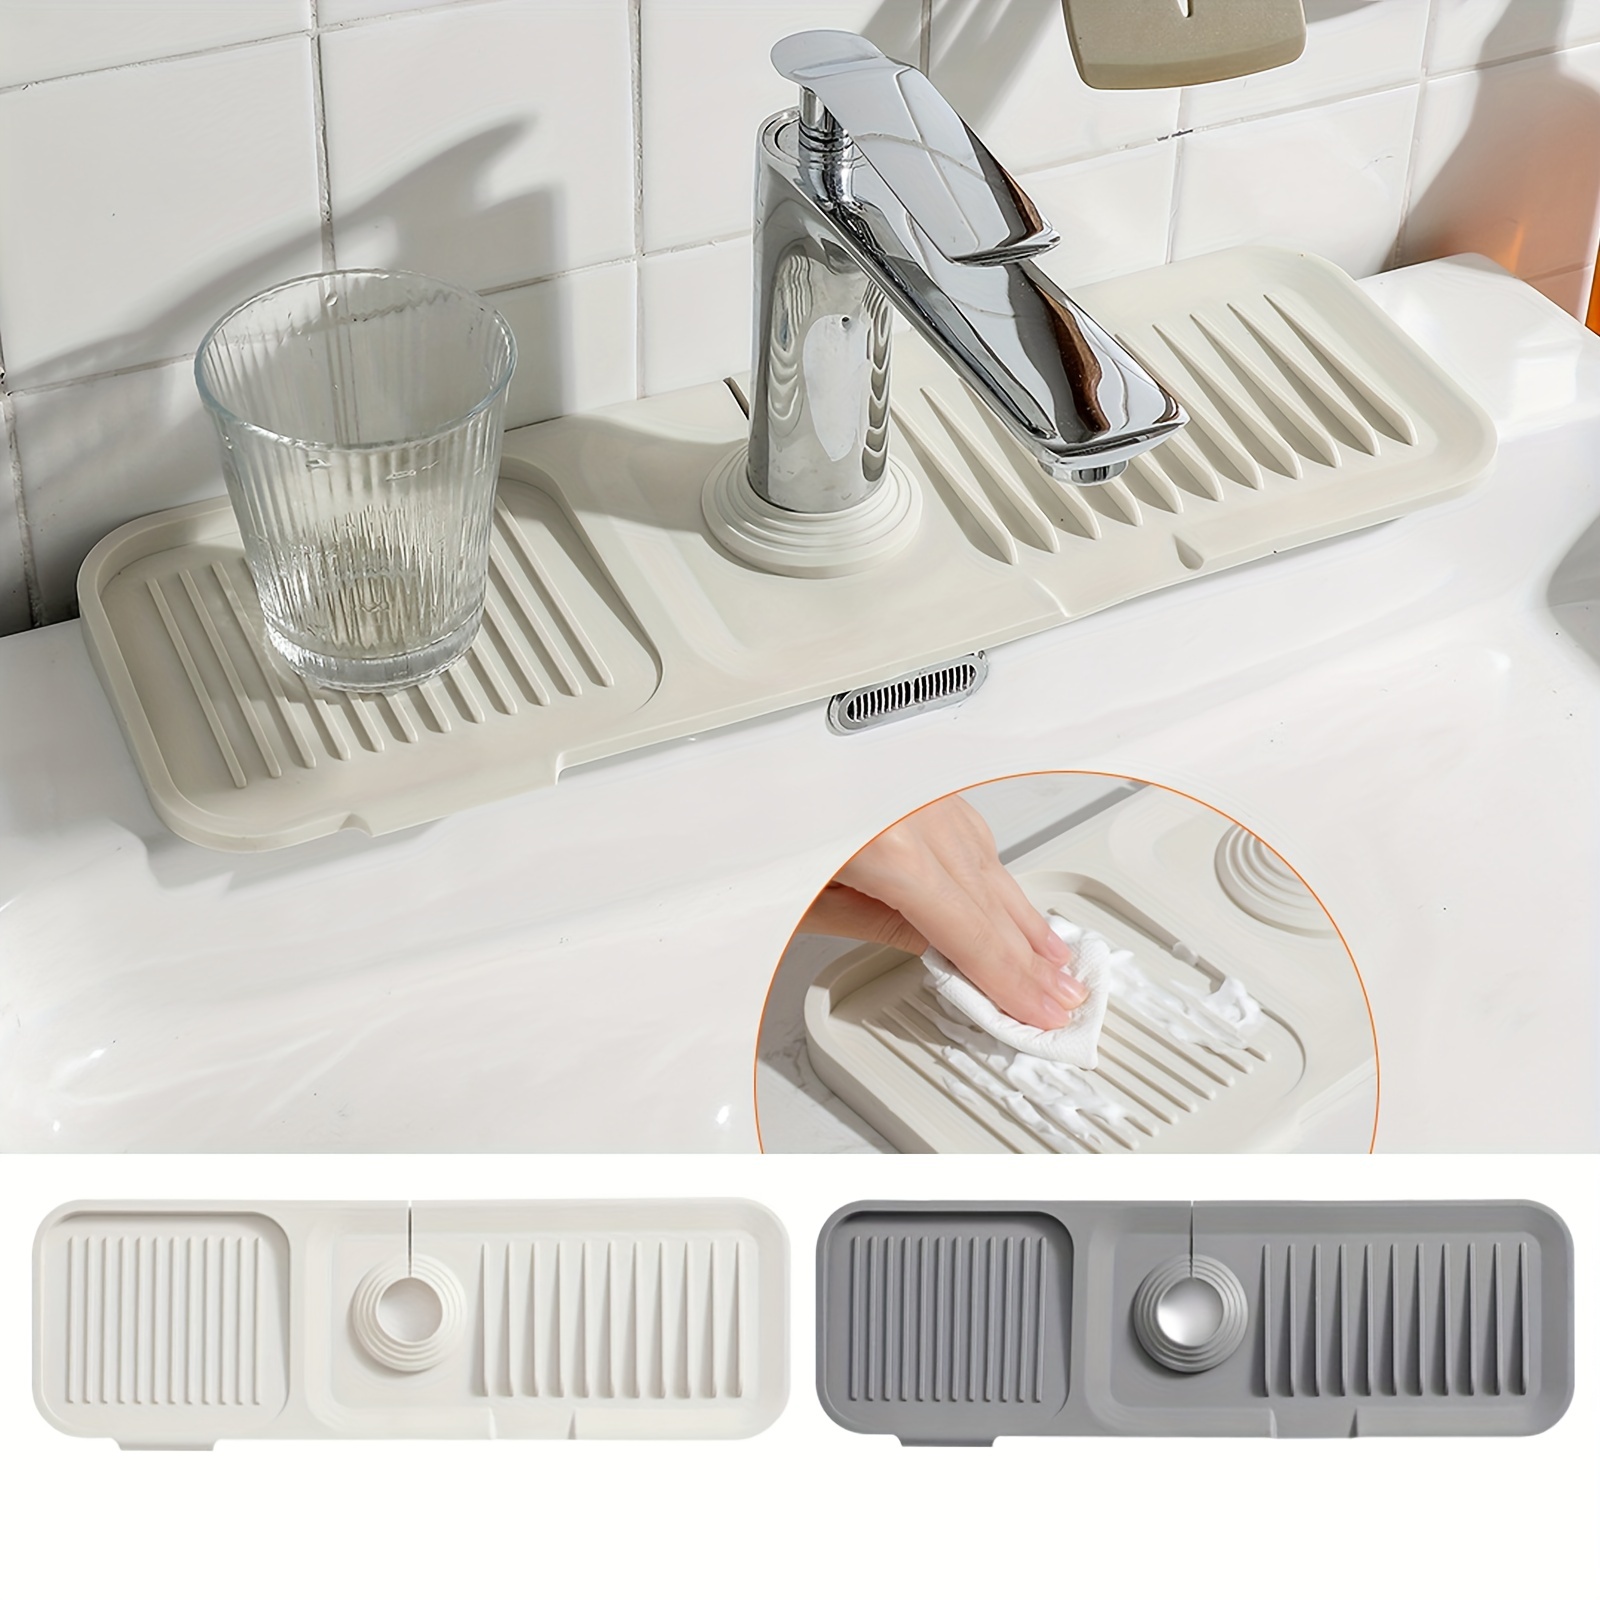 Kitchen Silicone Faucet Handle Drip Catcher Tray - Silicone Sink